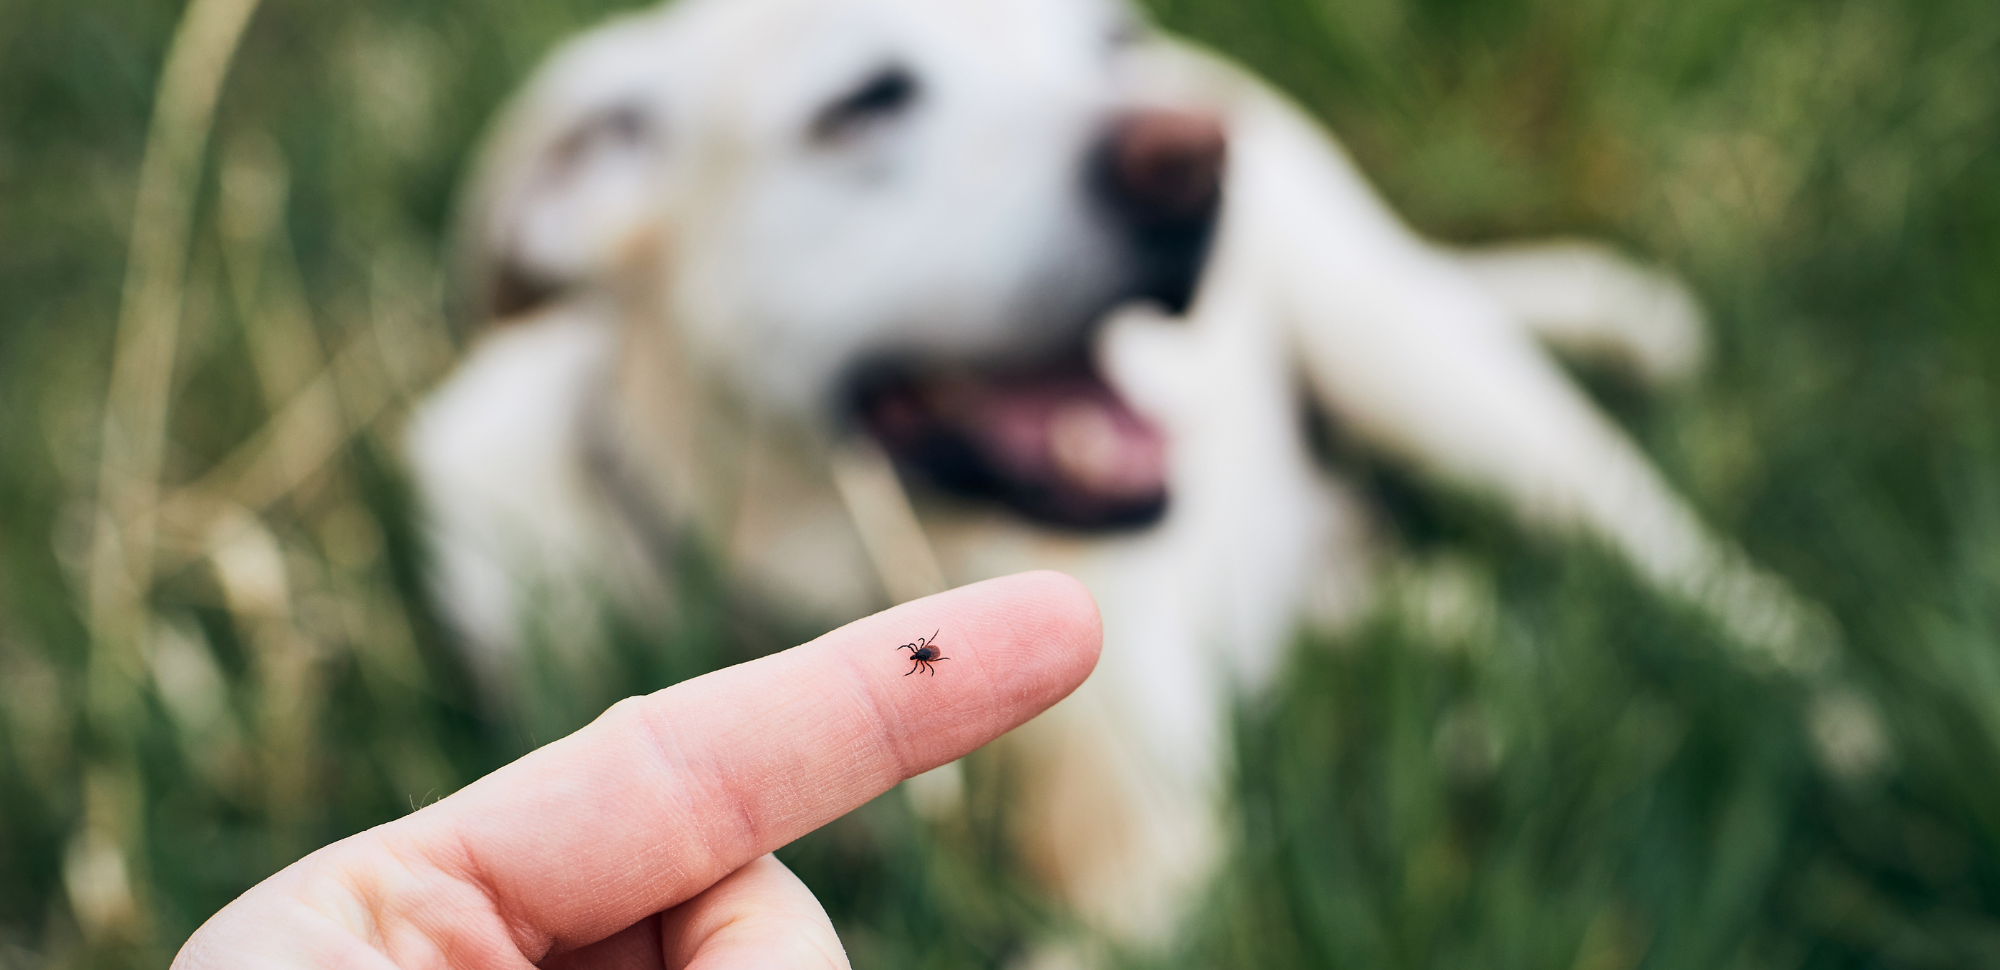 finger with tick on the tip with a white dog in background